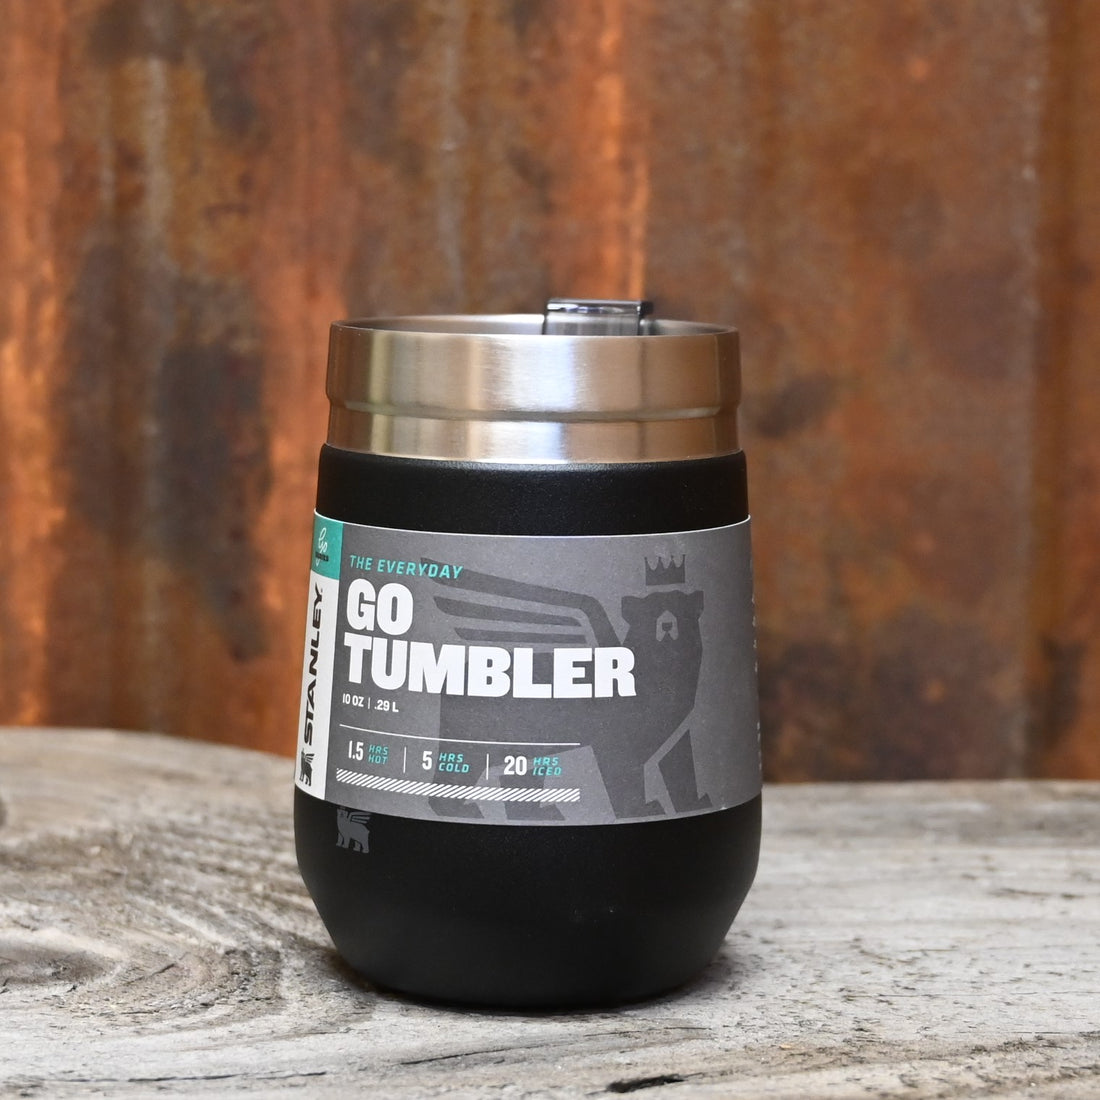 Stanley The Everyday Wine Tumbler in Matte Black view of tumbler